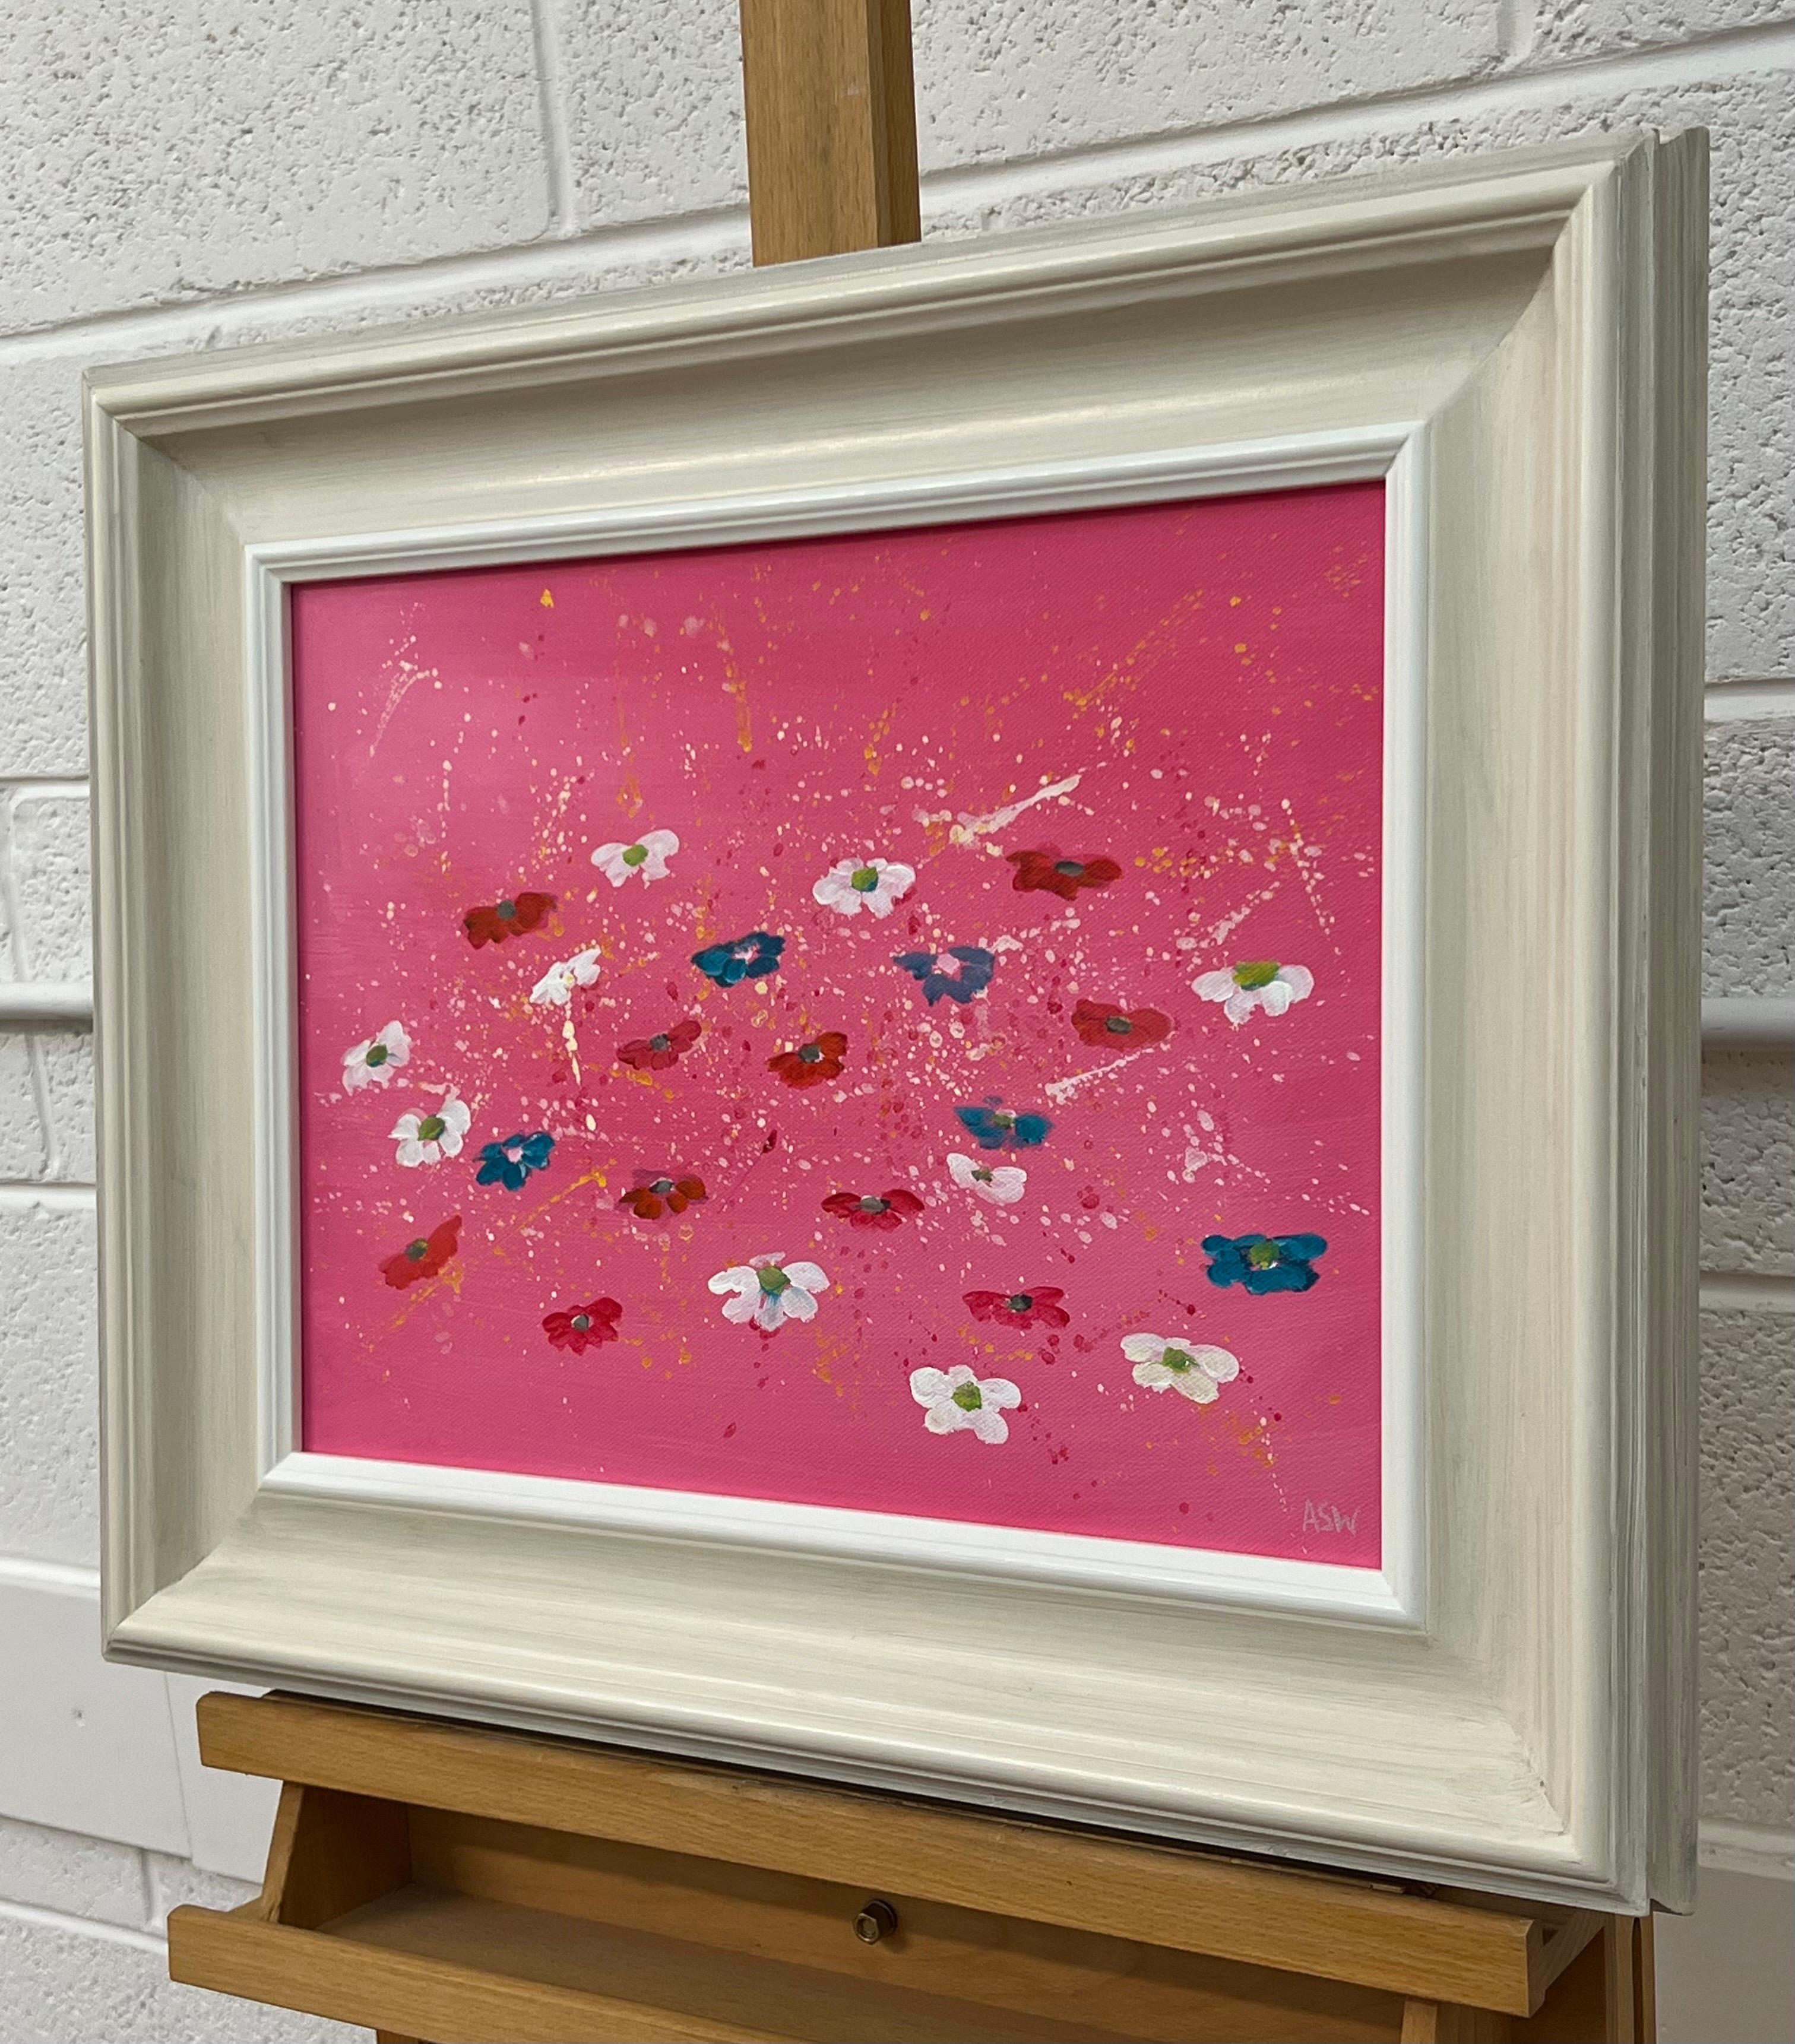 Abstract White & Turquoise Flowers on Pink Background by British Contemporary Artist, Angela Wakefield. This original is from the 'Spring Burst' Interior Design Series. Framed in a high quality off-white contemporary wooden moulding.

Art measures